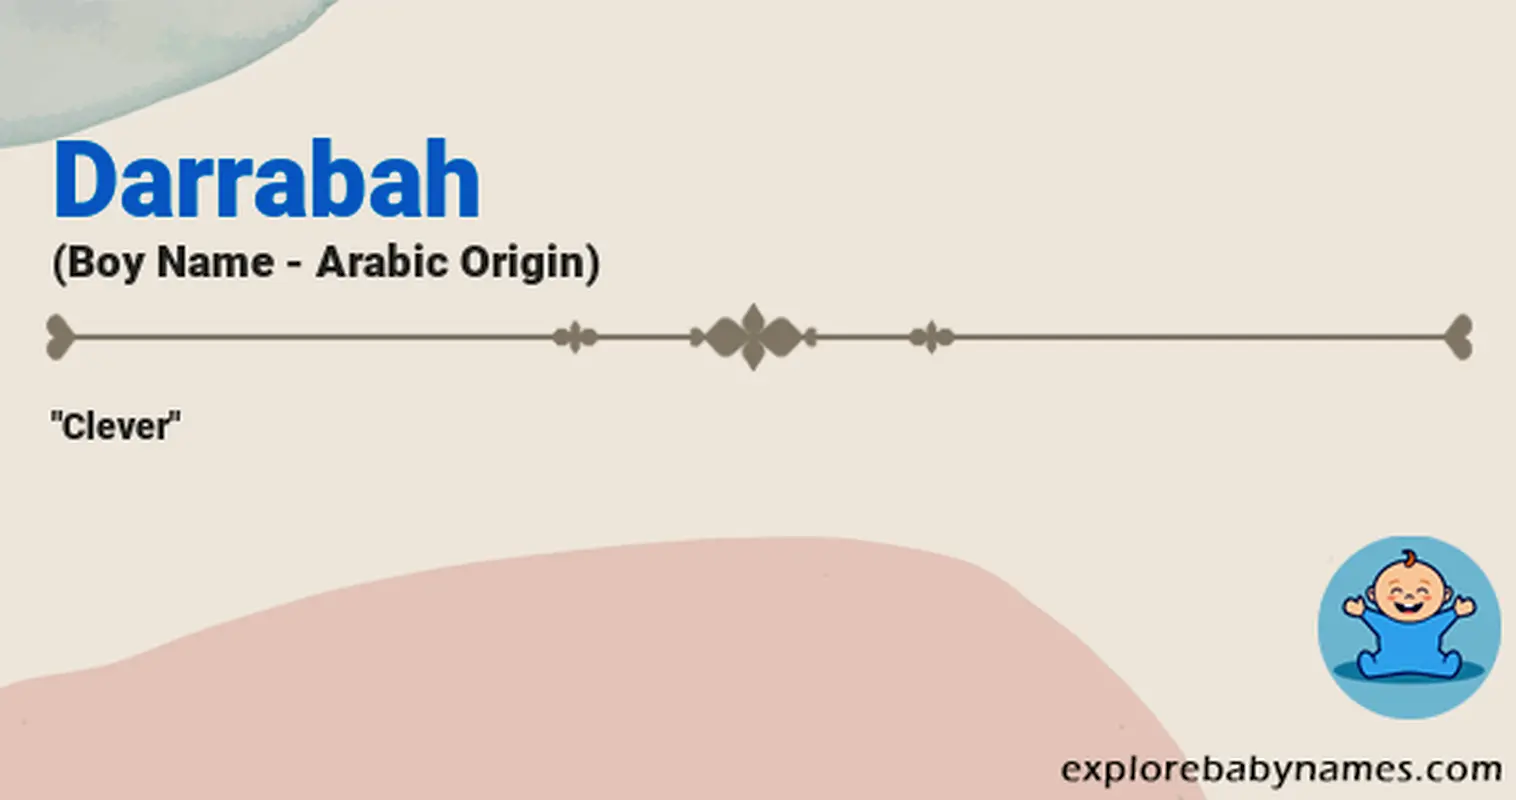 Meaning of Darrabah